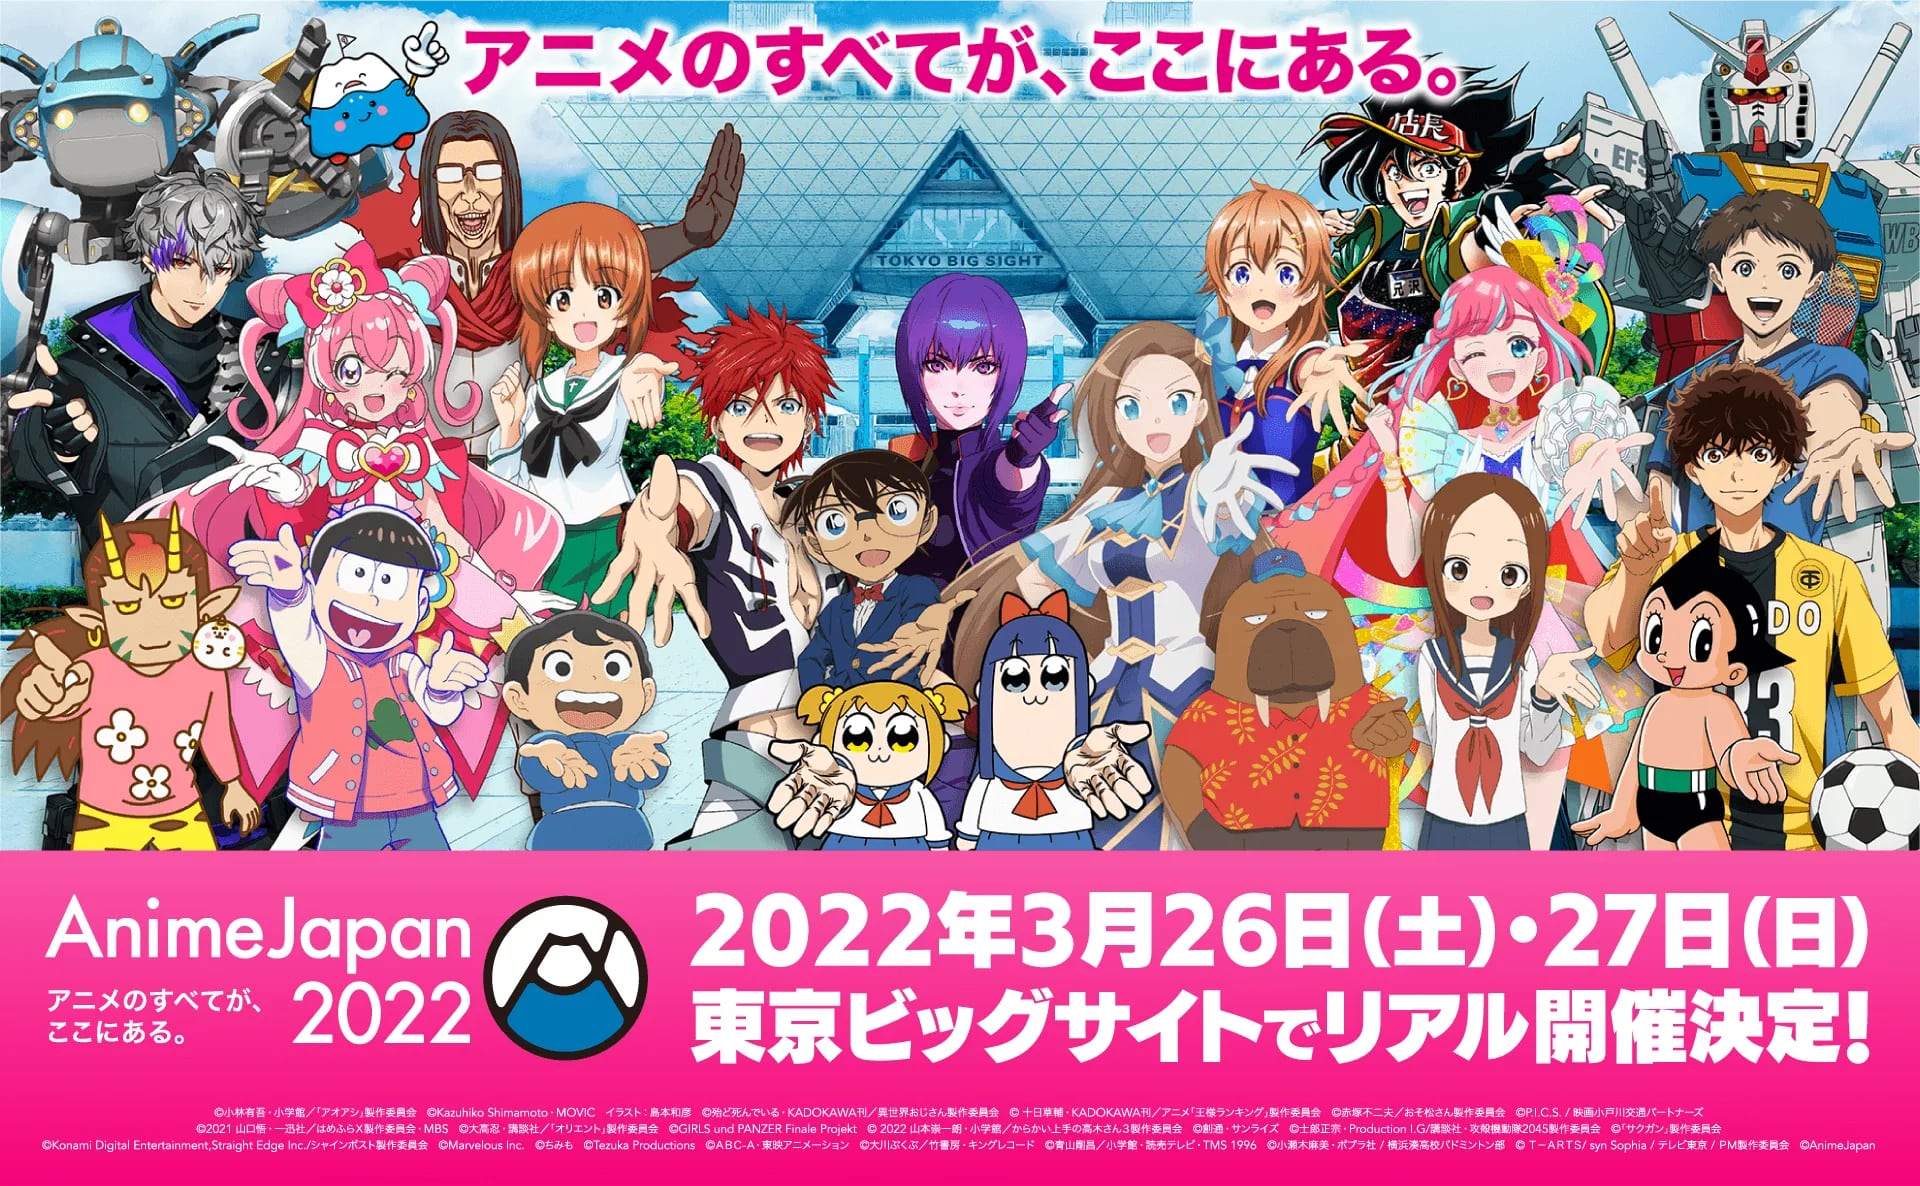 10 Upcoming anime conventions in 2023